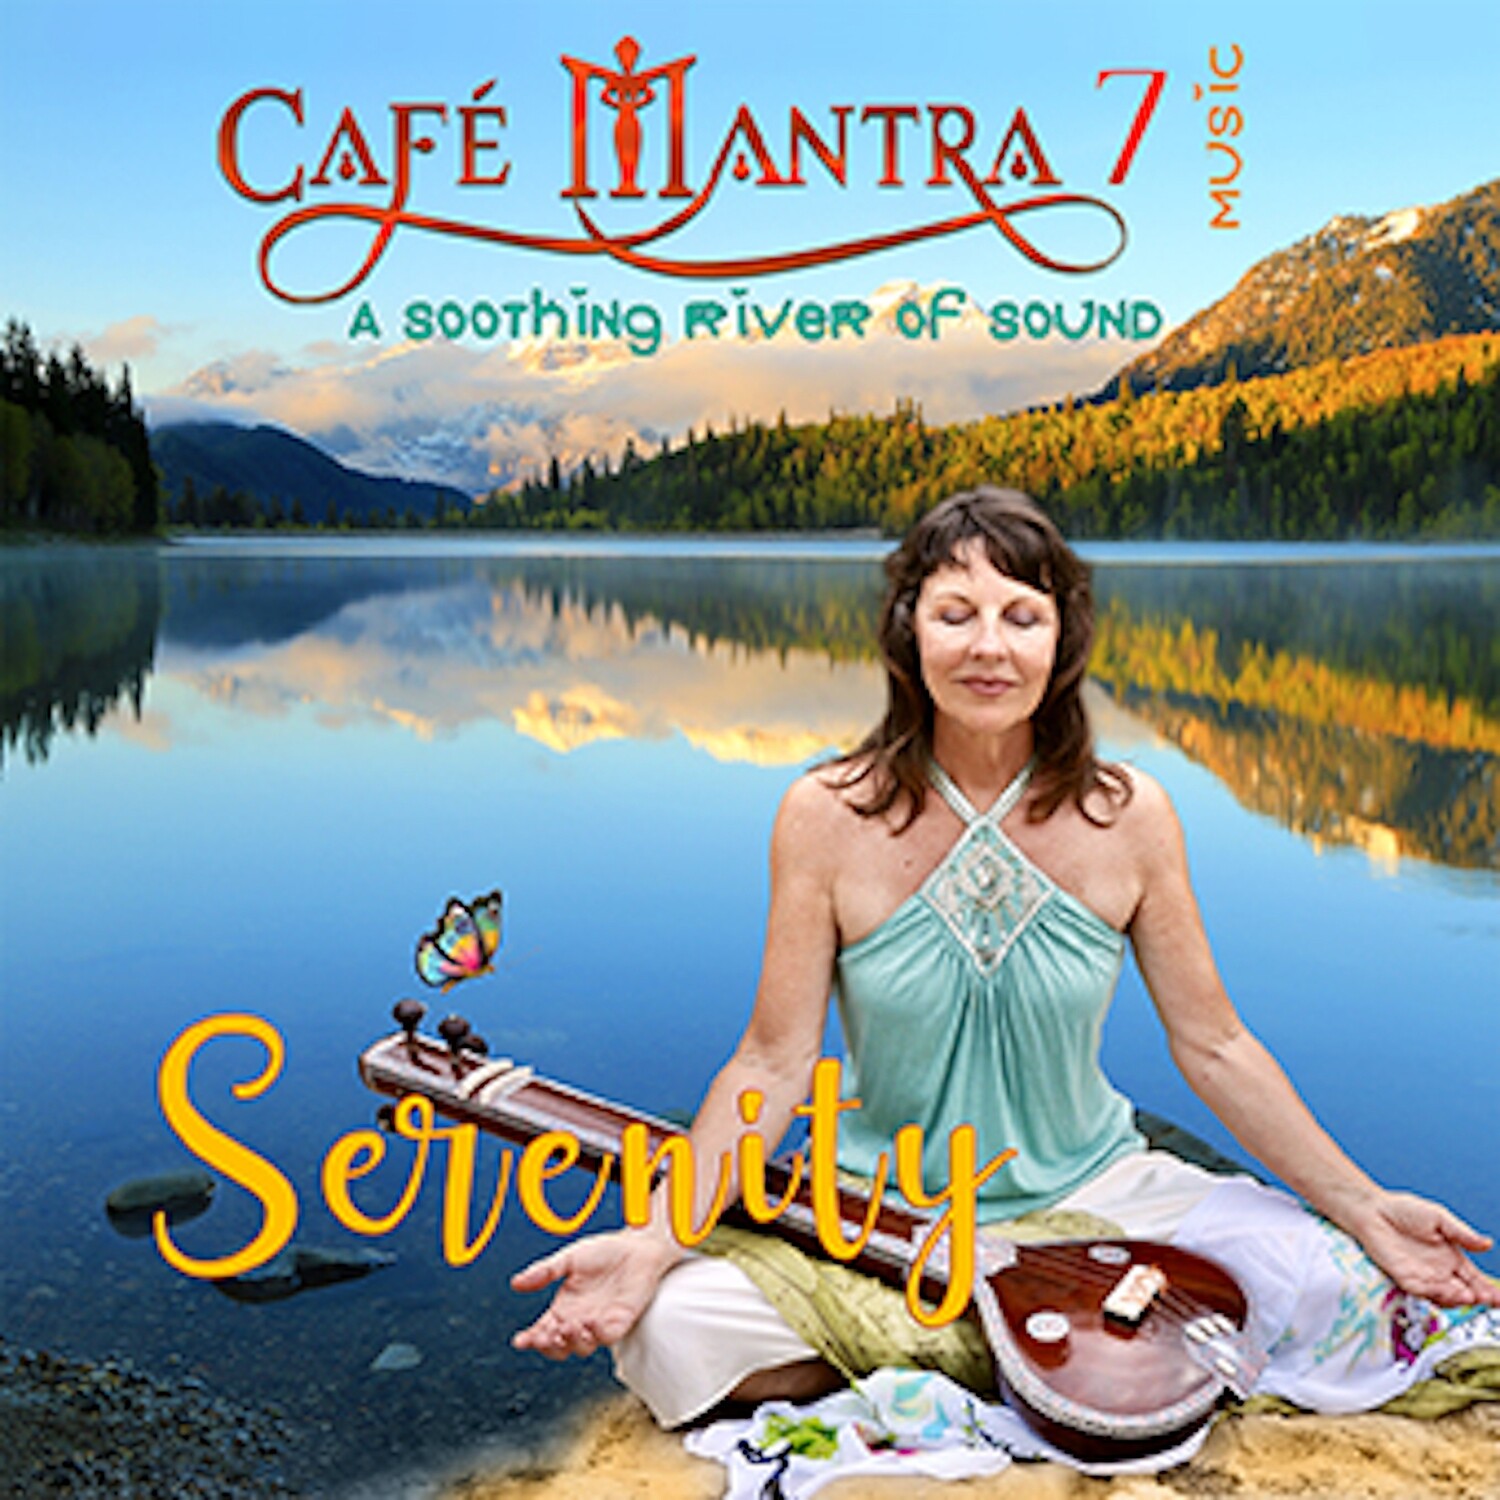 DOWNLOAD: Cafe Mantra Music 7 Serenity